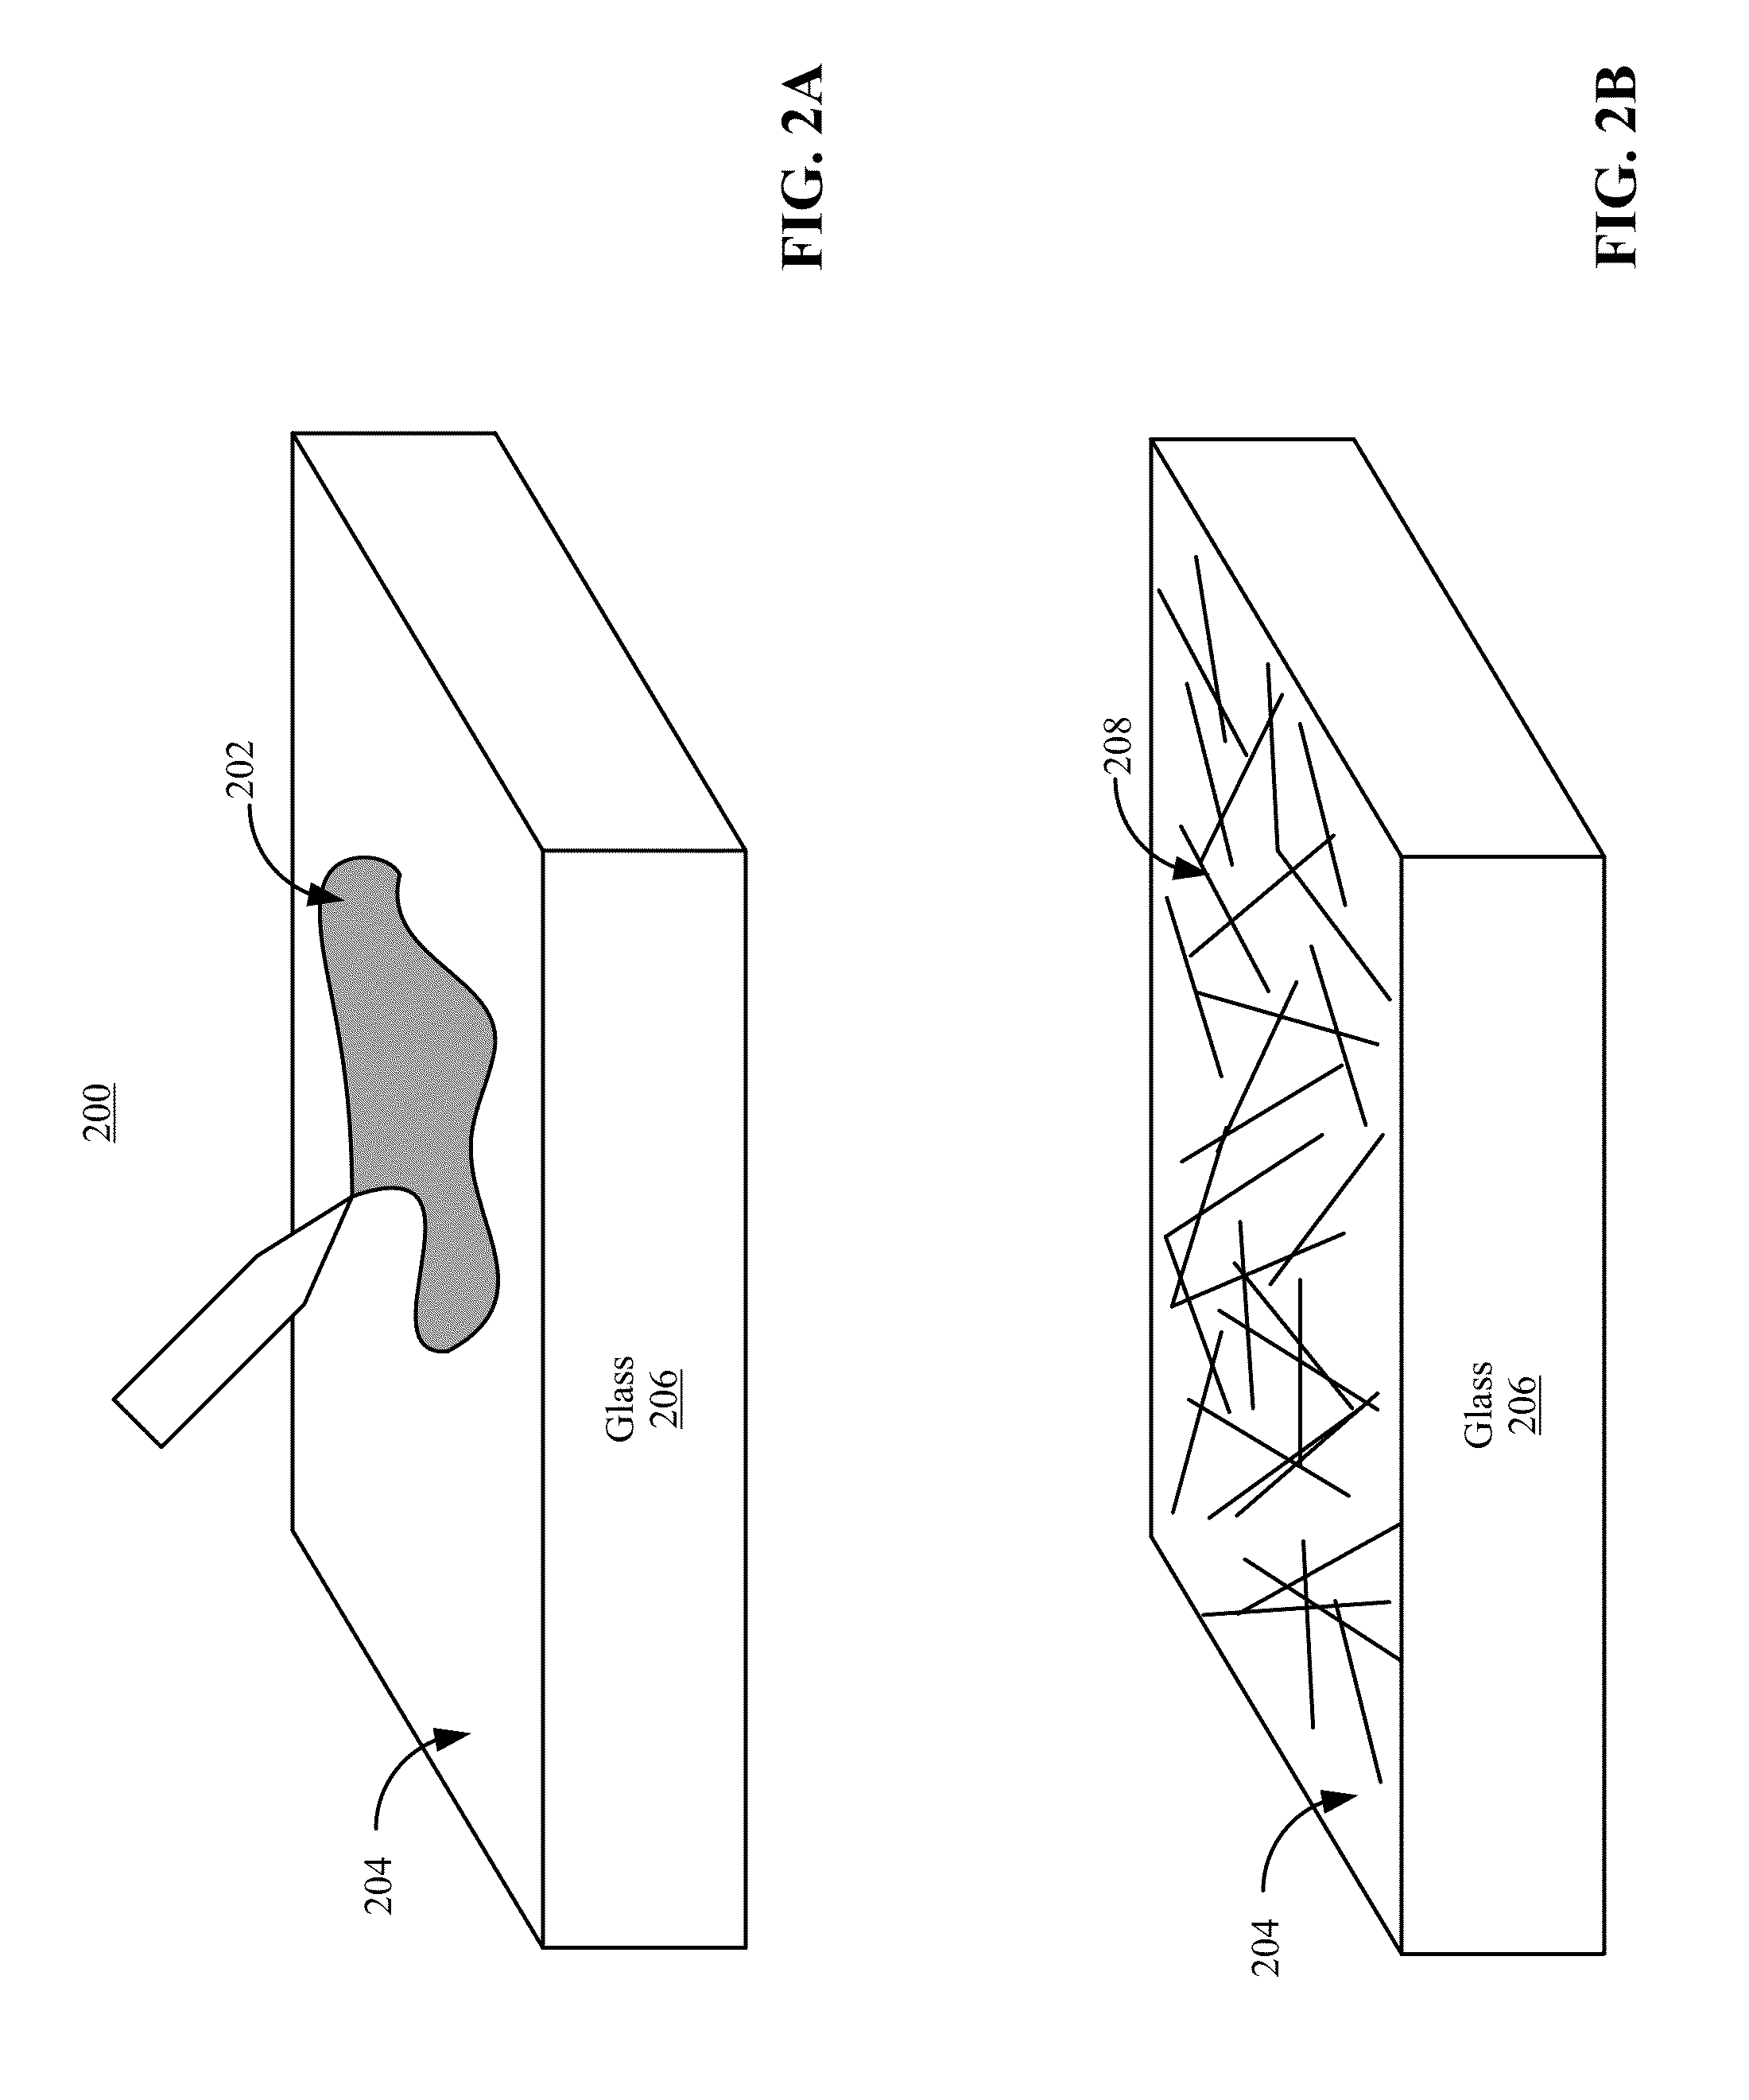 Composite Conductive Films with Enhanced Thermal Stability